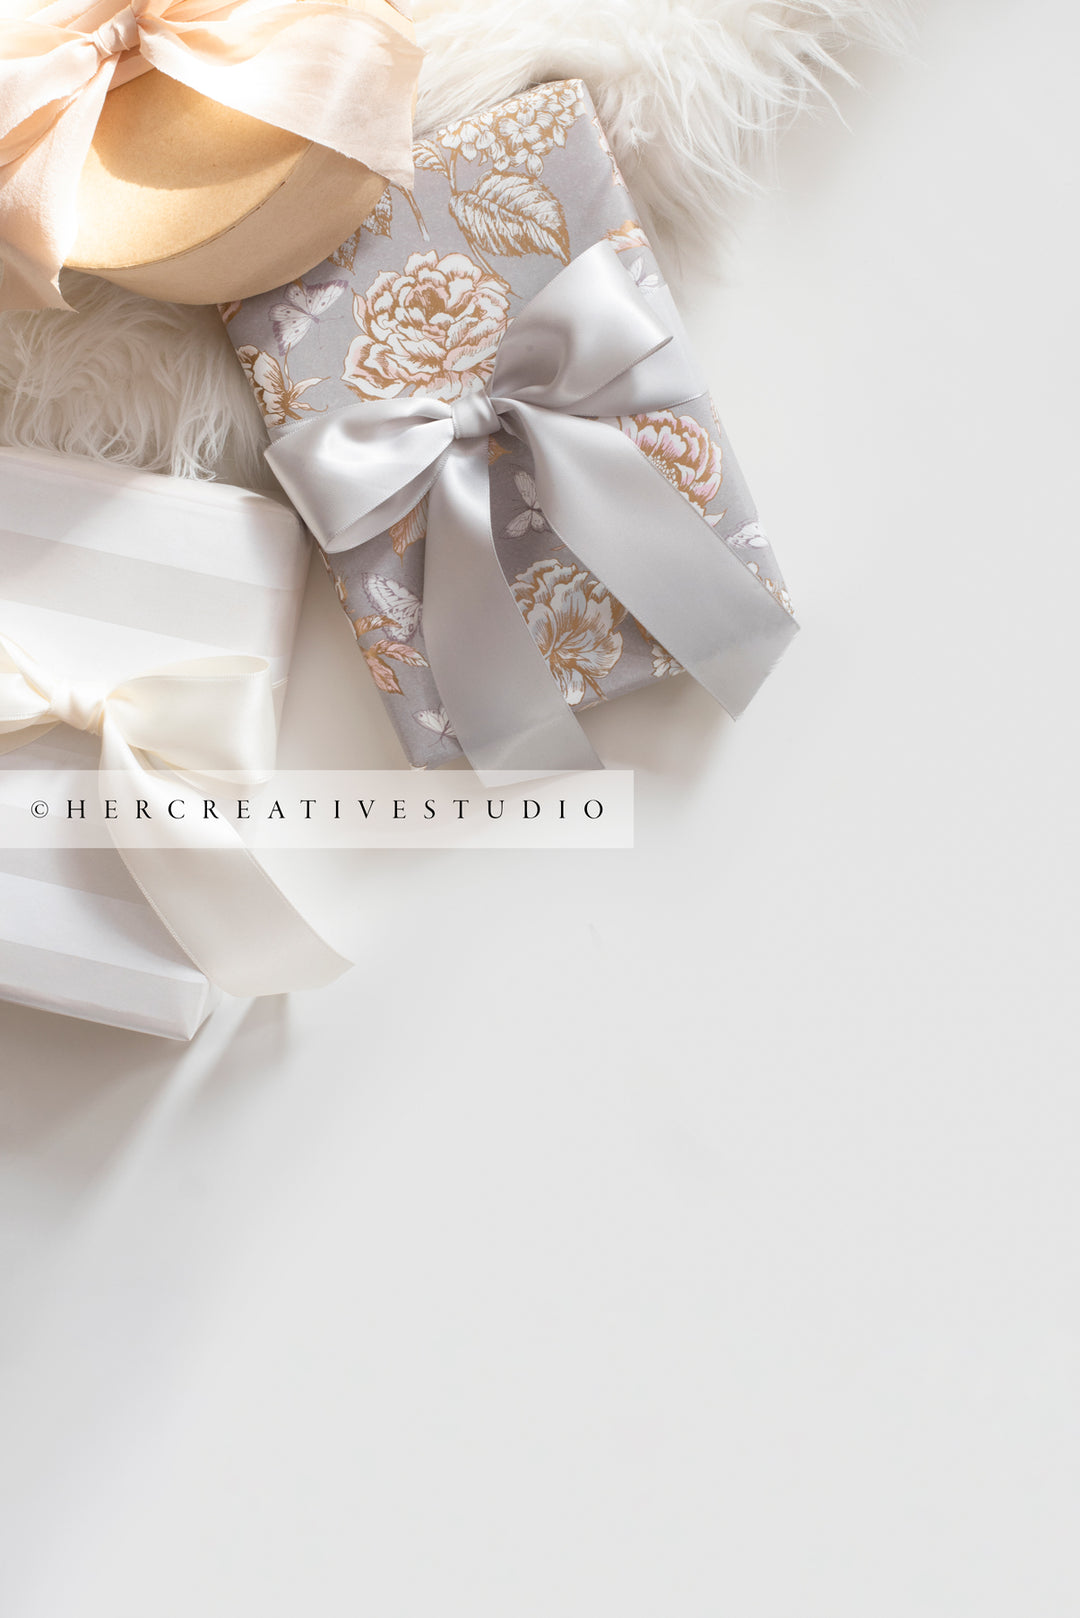 Gifts with Ribbon on White Background, Stock Image